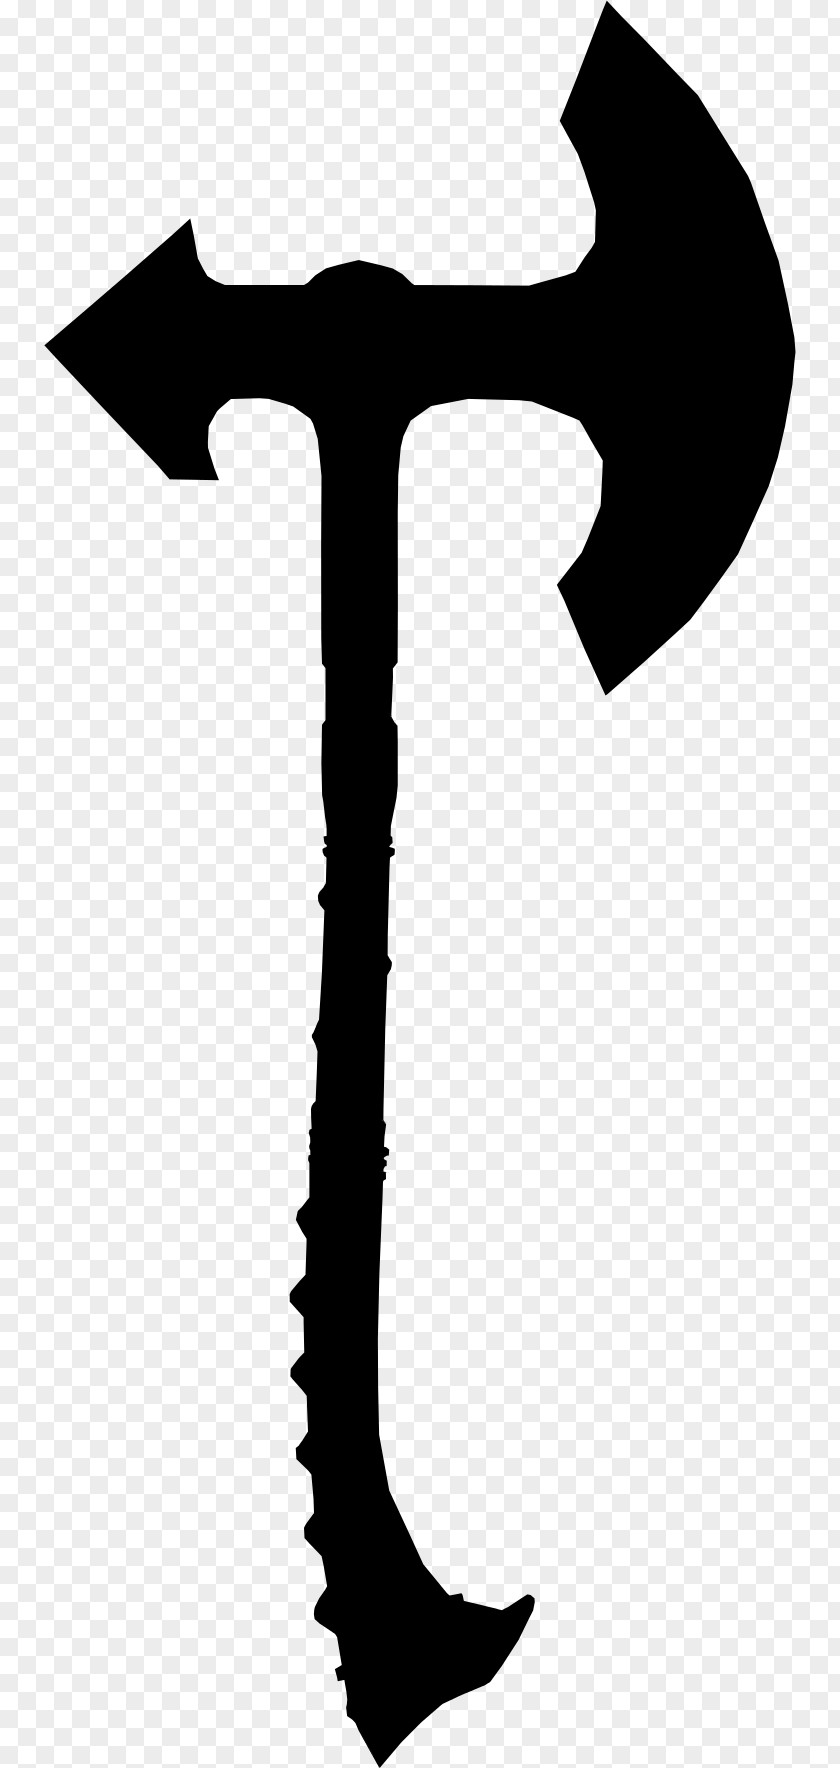 Throwing Axe Weapon Clip Art PNG